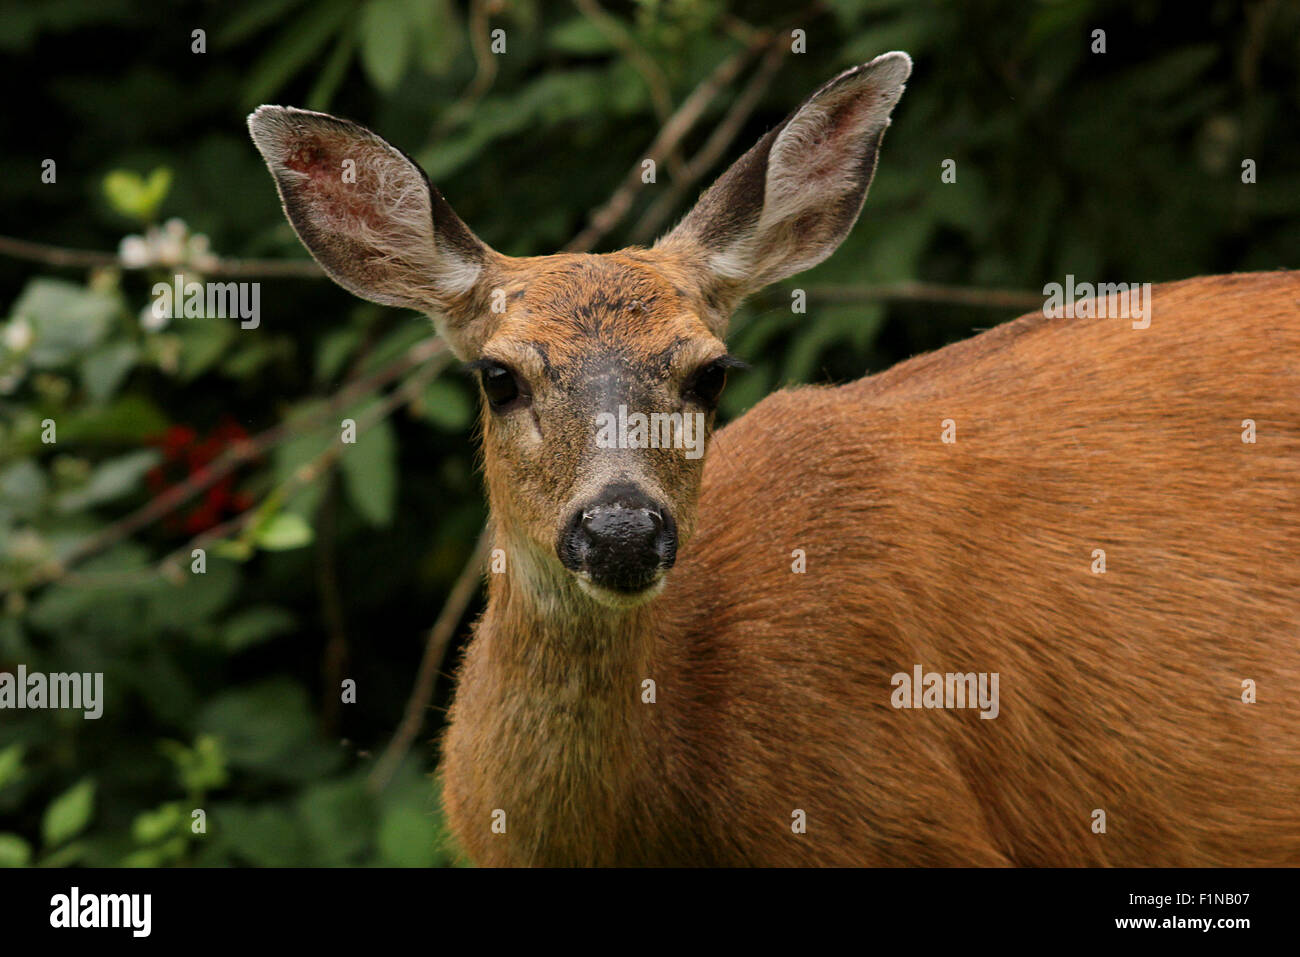 Blacktailed Deer standing still for the camera in a neighbourhood garden in Nanaimo, British Columbia, Canada Stock Photo